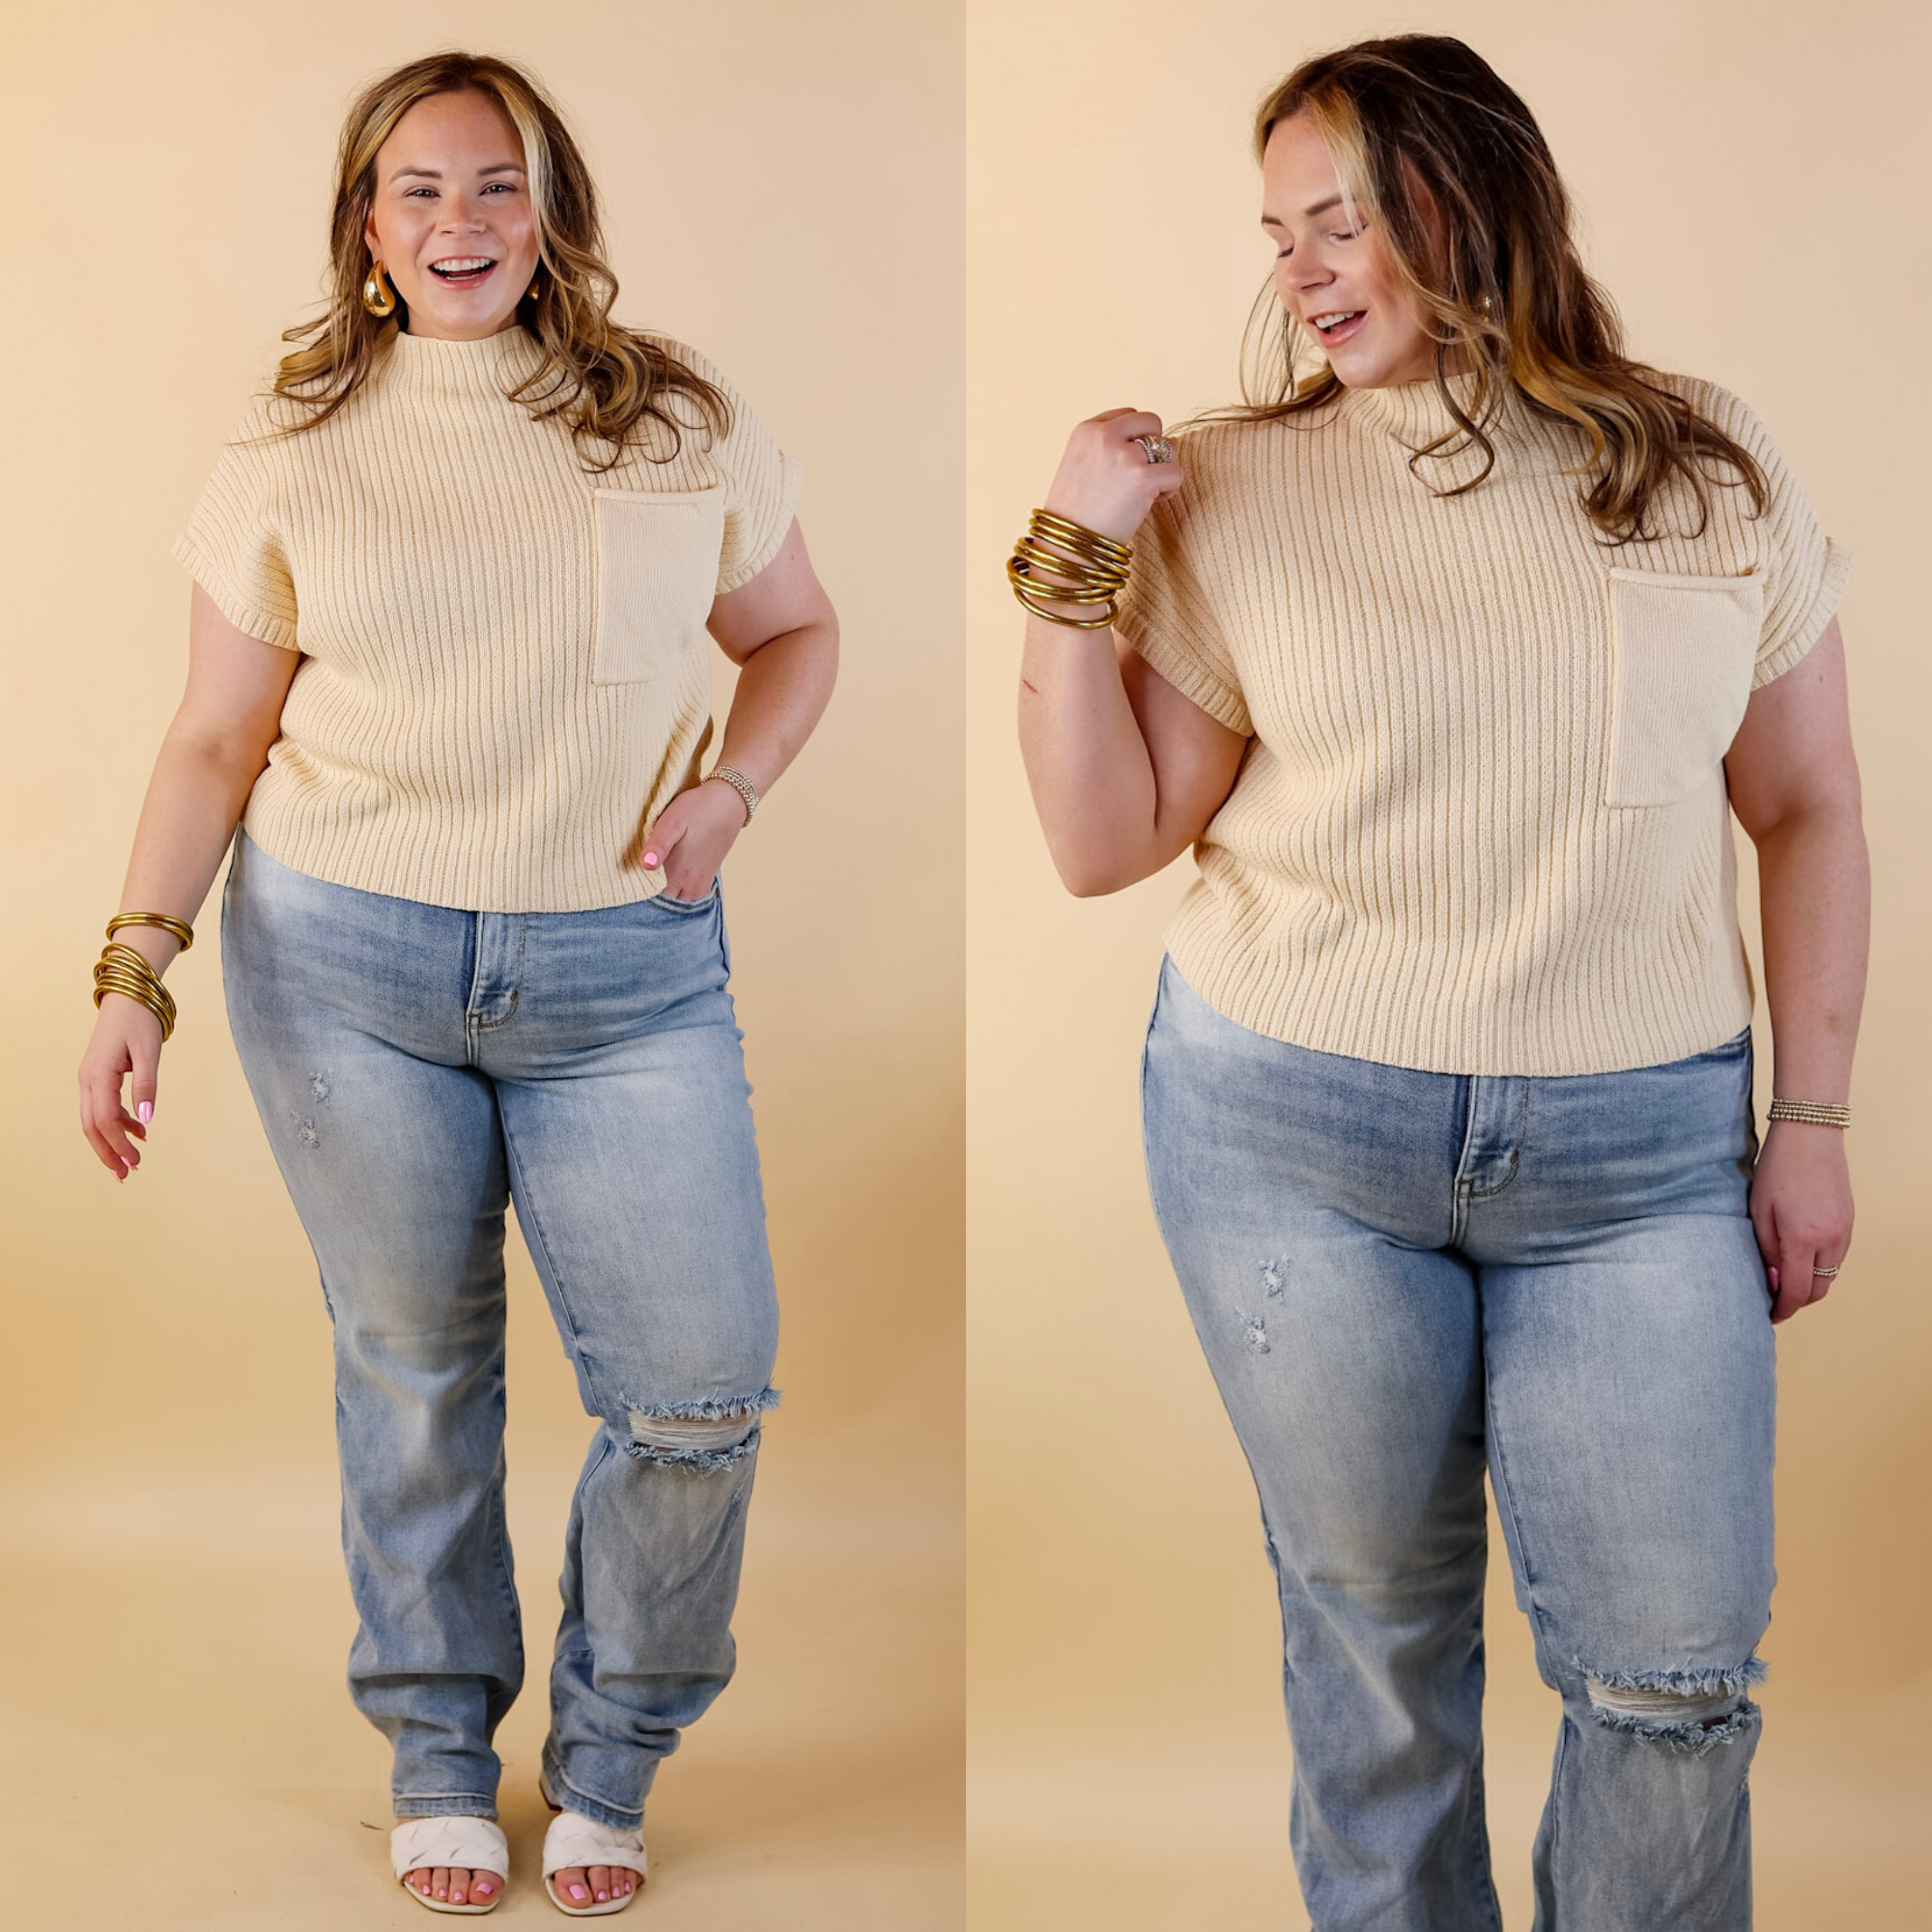 City Sights Cap Sleeve Summer Sweater Top with Pocket in Beige - Giddy Up Glamour Boutique